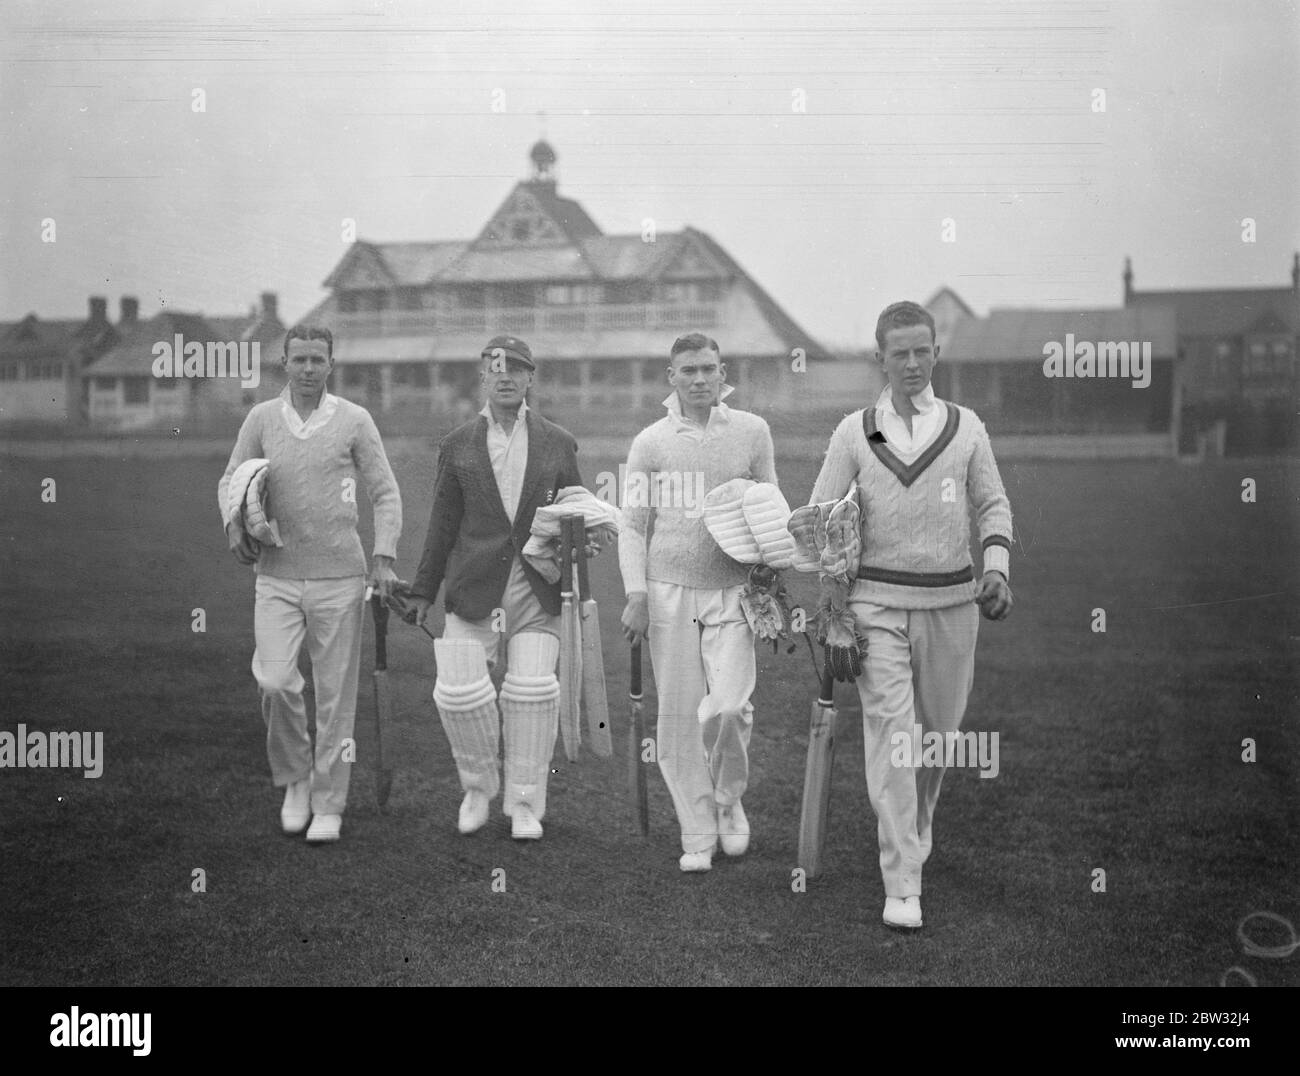 Essex County Cricket Club practice opens at Leyton . The Essex County Cricket Club began their practice for the coming season at Leyton , Essex . Left to right : Taylor , Pepo , Evans and Wade going out for the first practice of the season at Leyton . 25 April 1932 Stock Photo